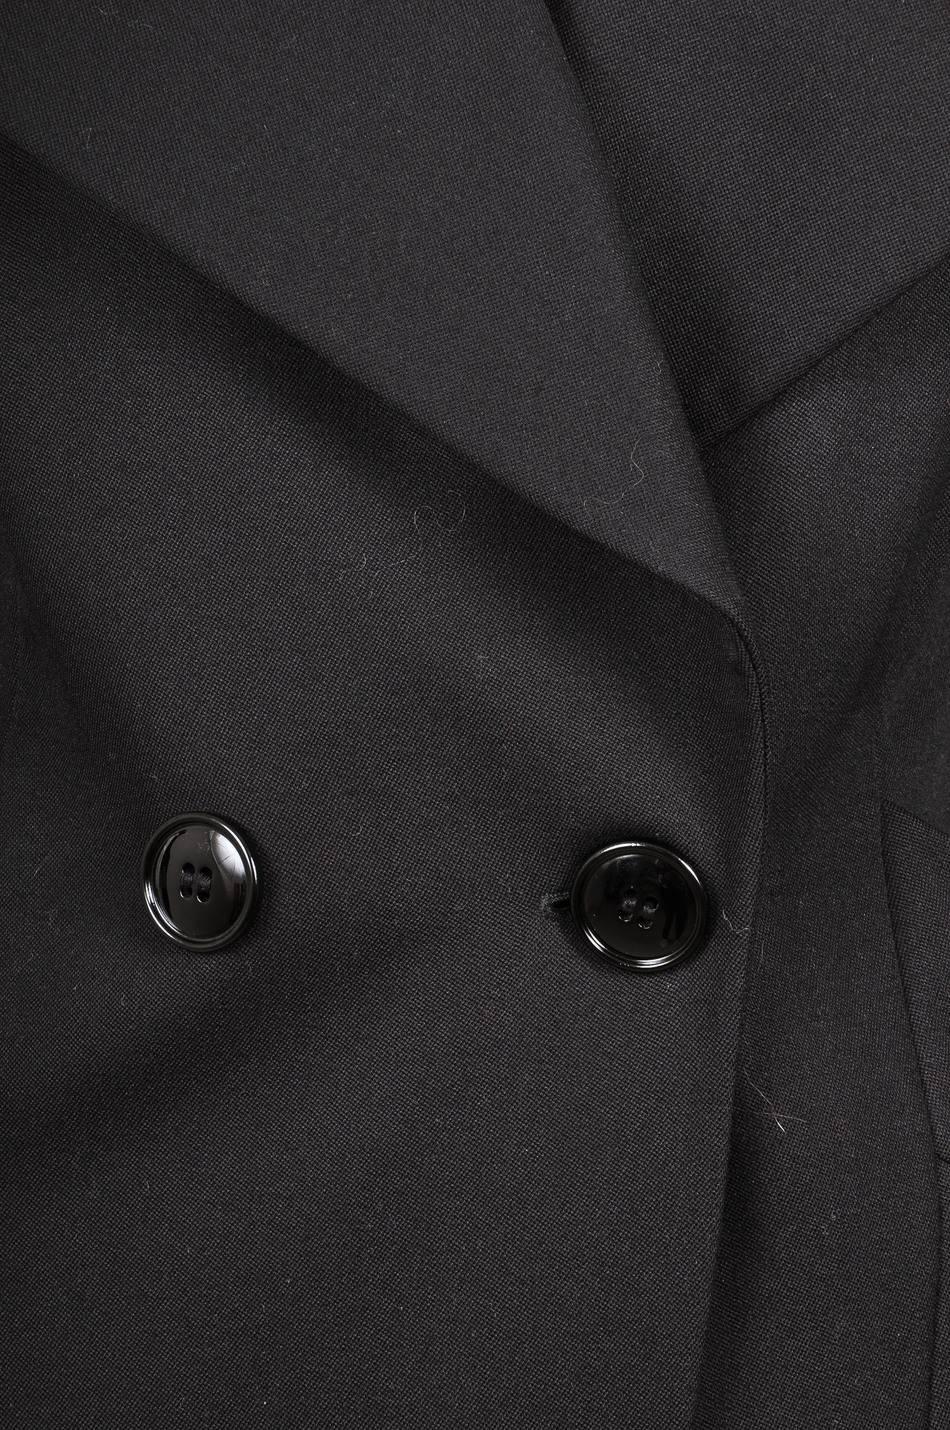 Vintage Gianfranco Ferre Black Wool Double Breasted Coat Size 40 In Good Condition For Sale In Chicago, IL